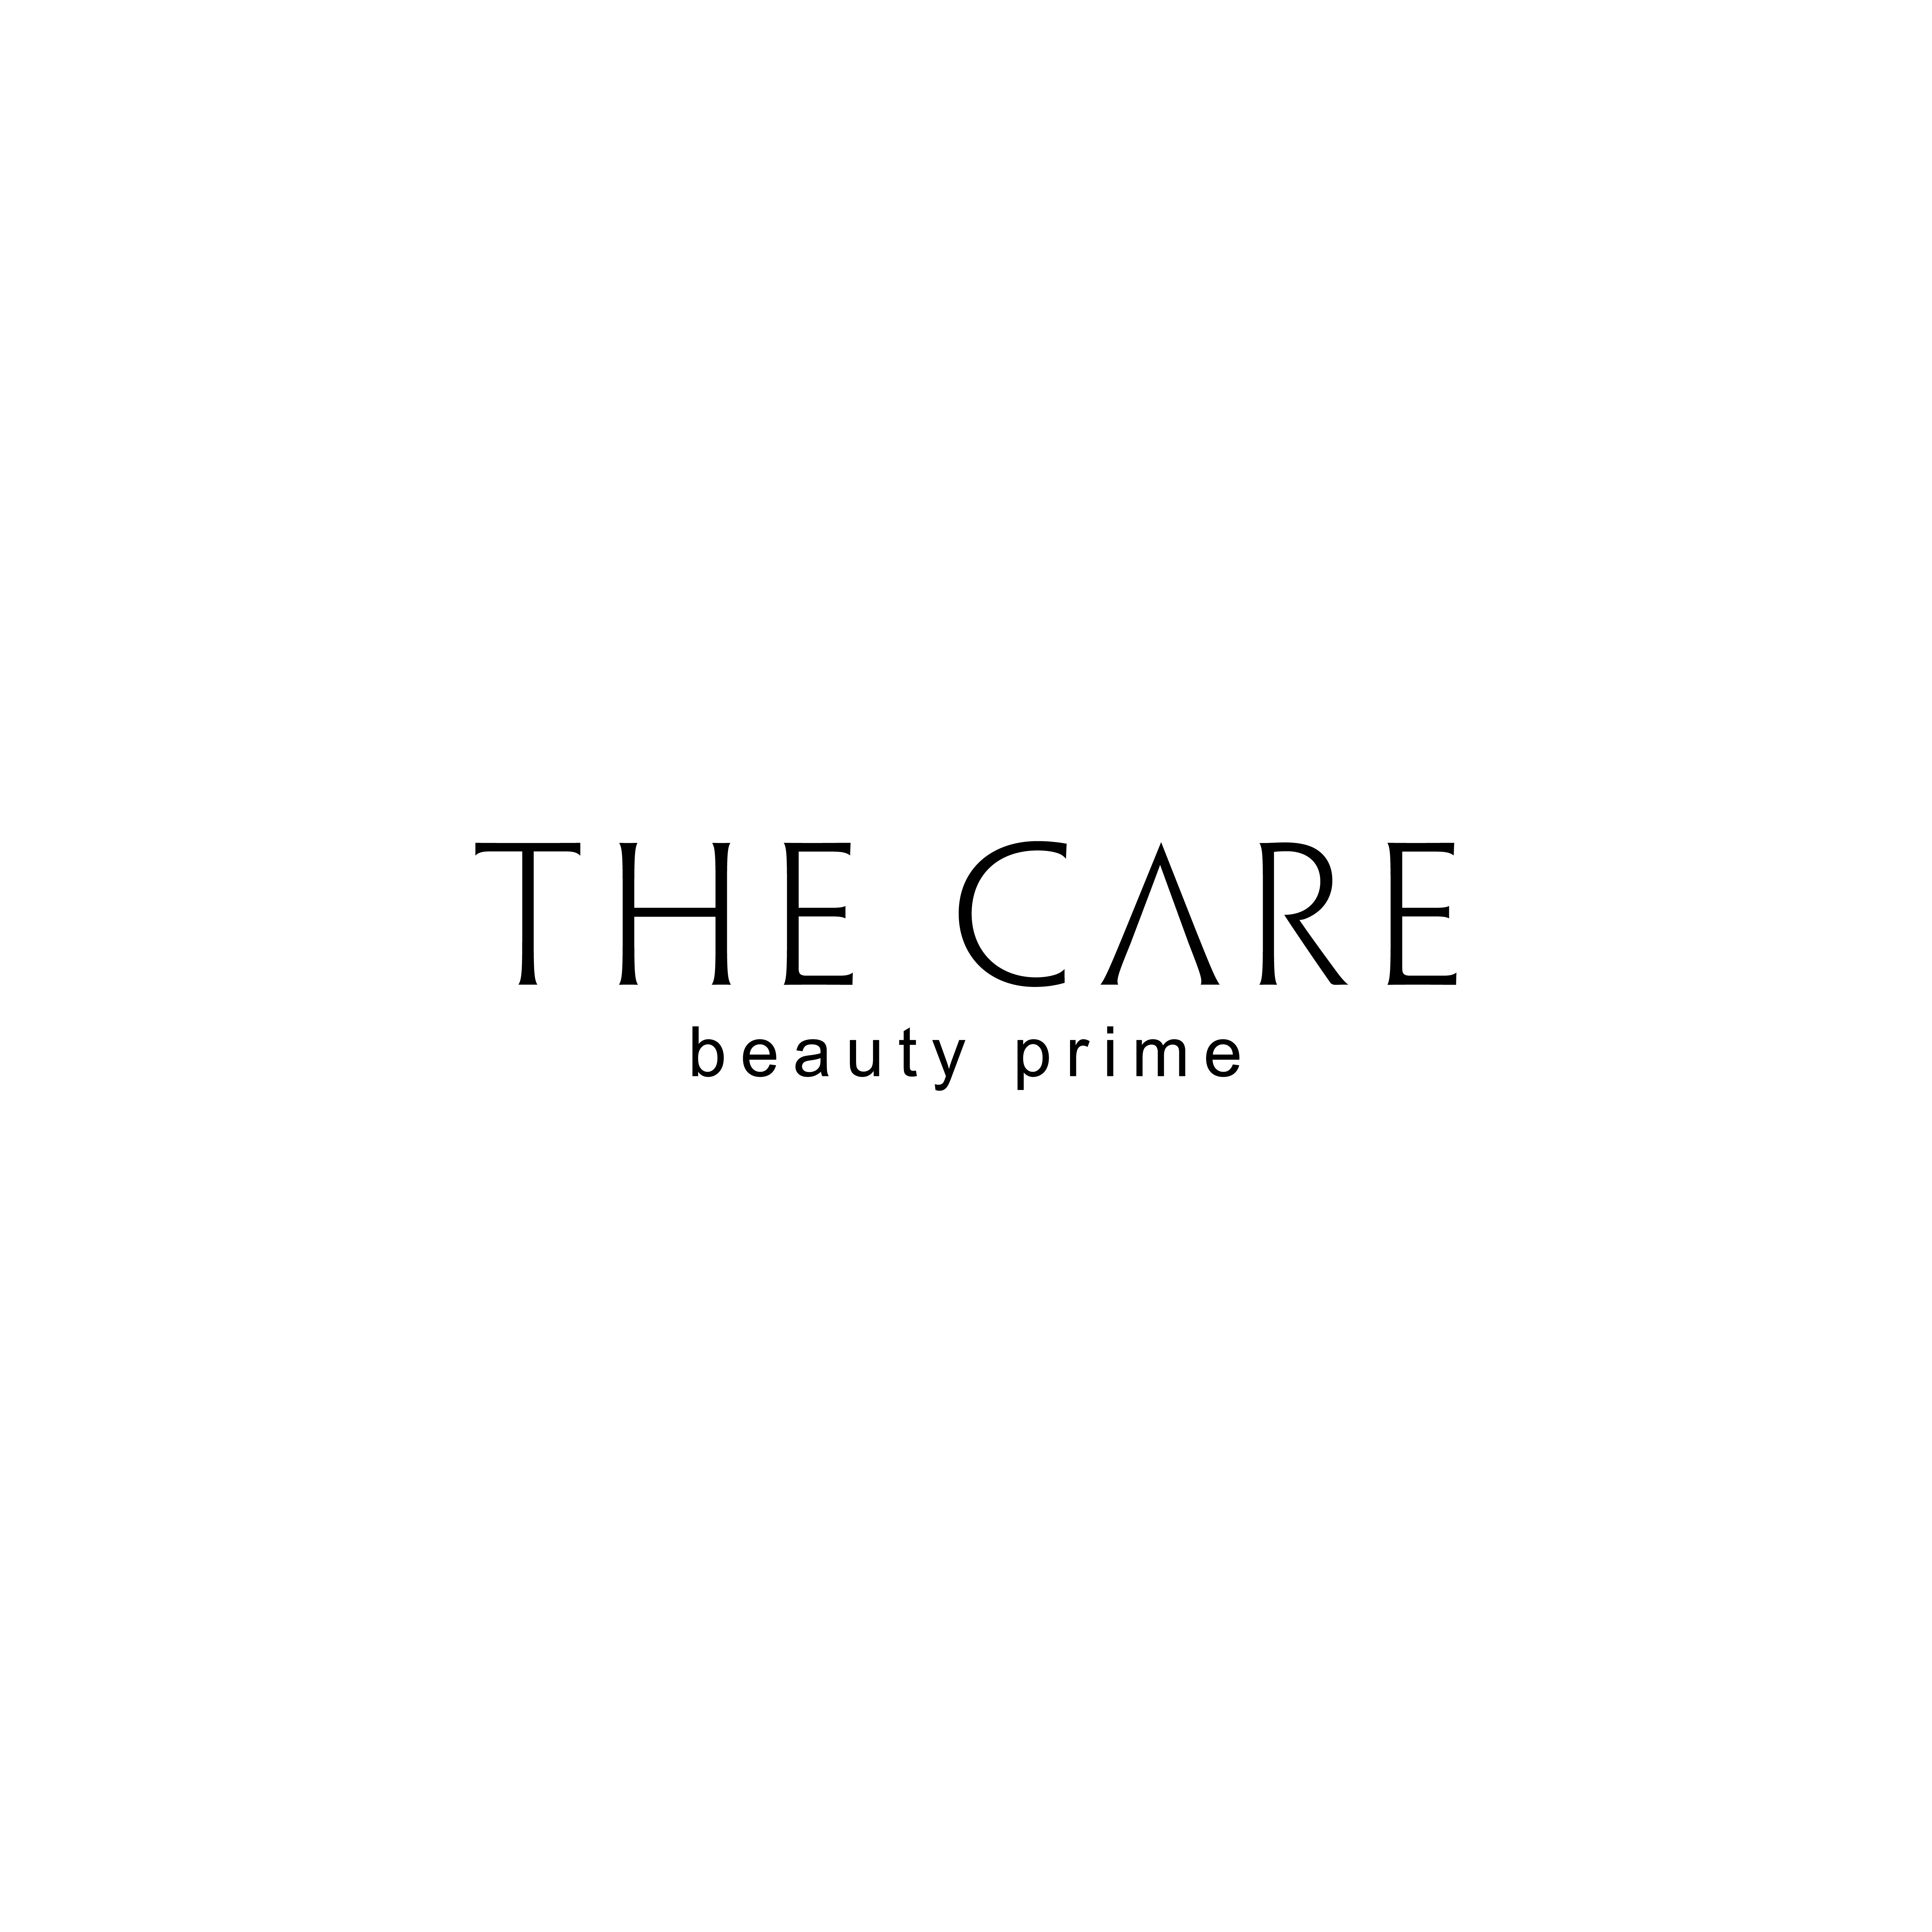 THE CARE beauty prime